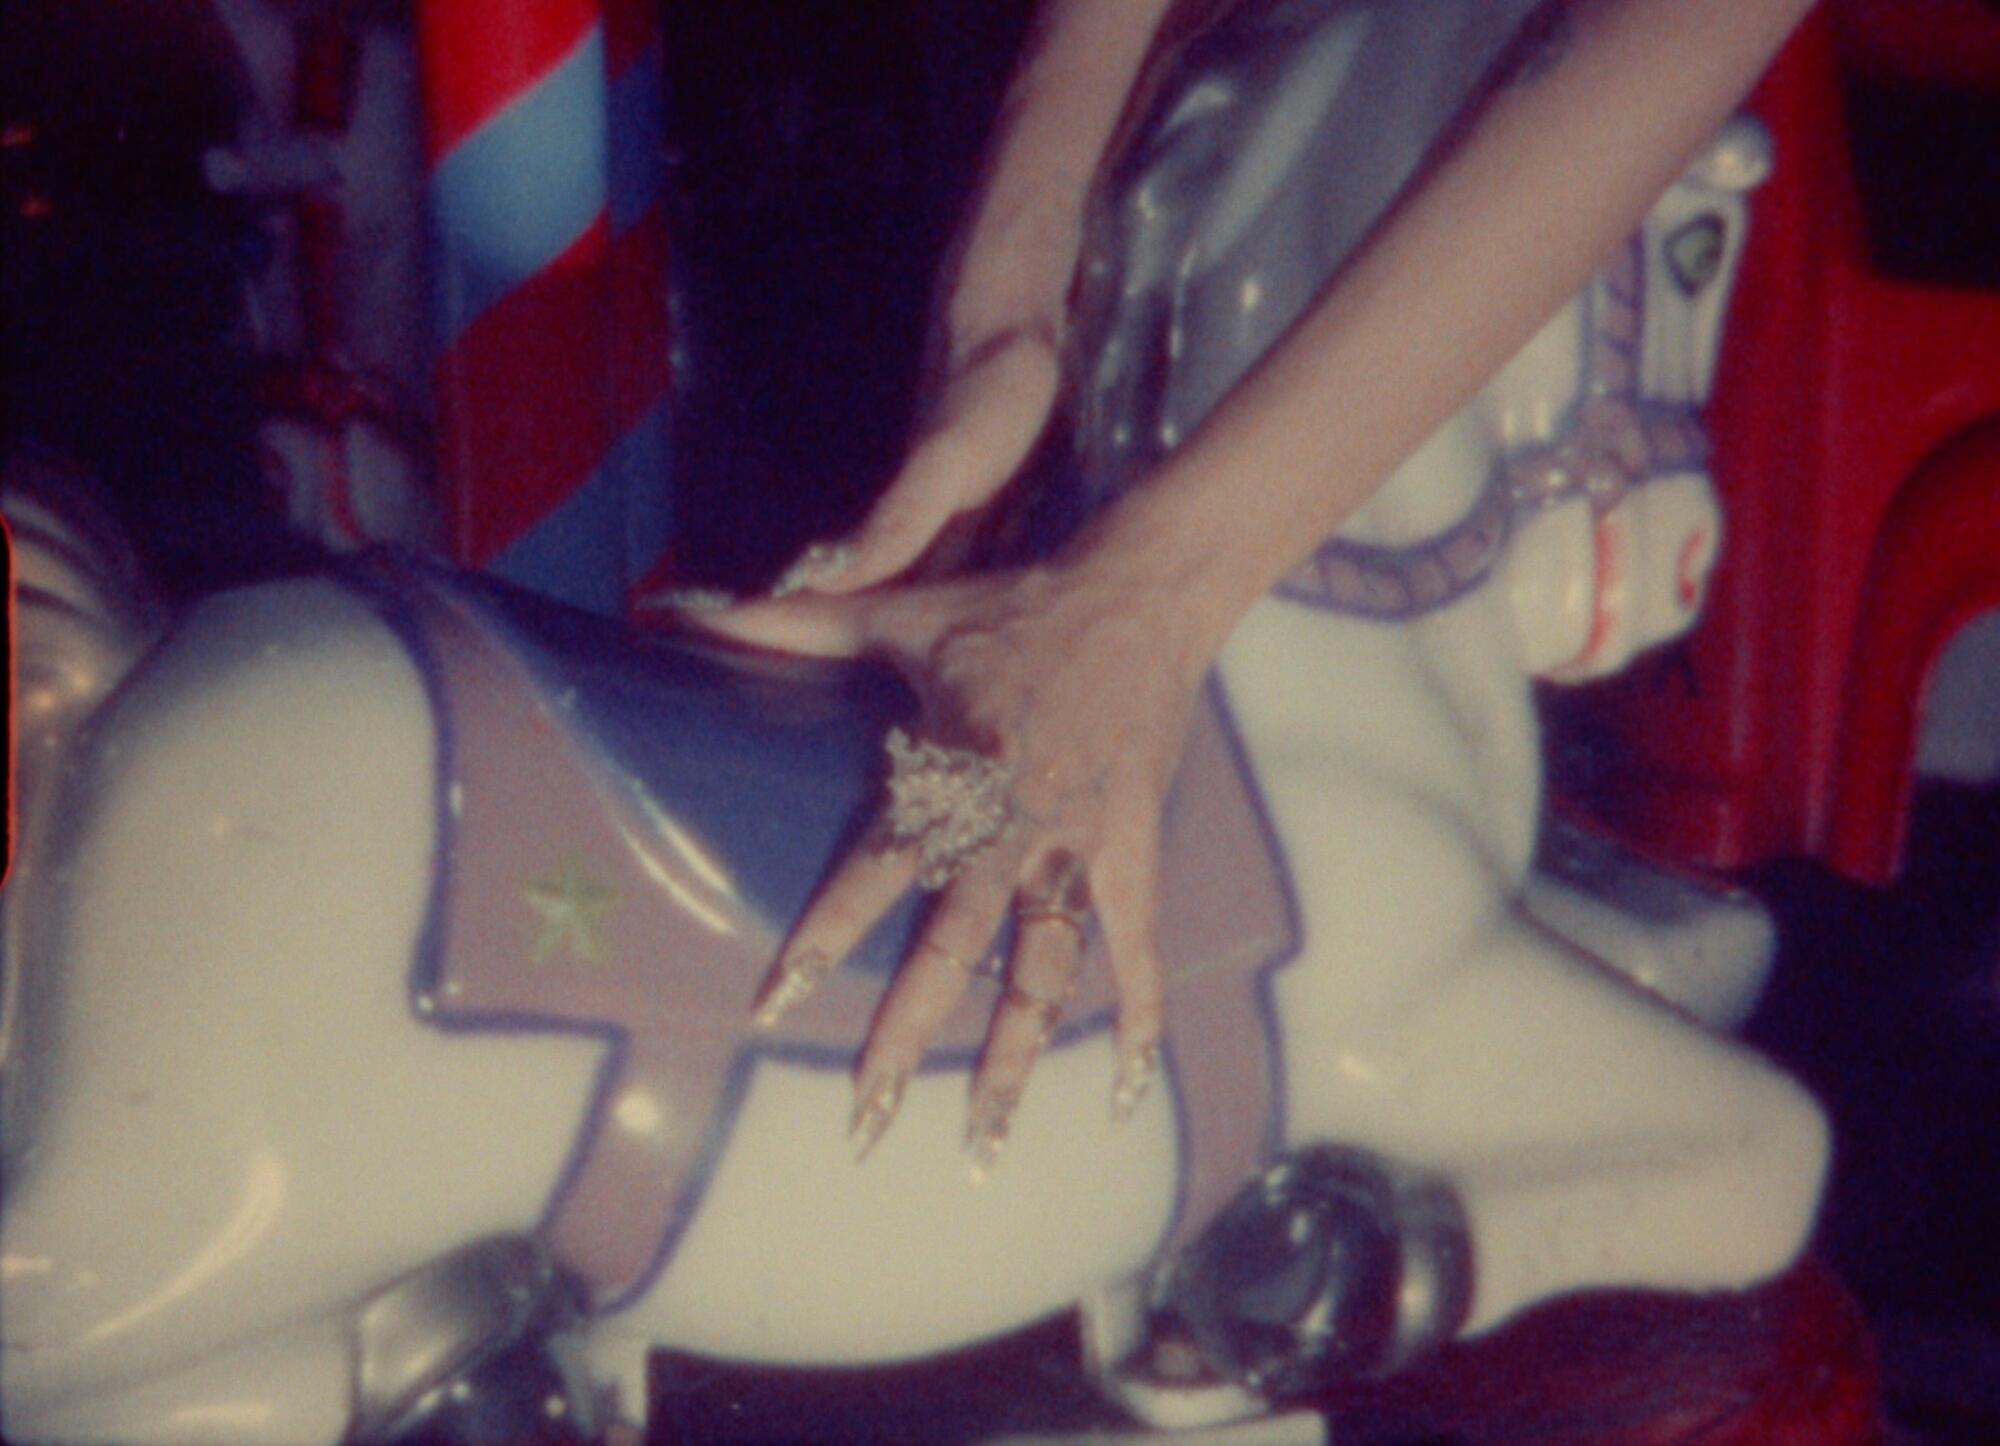 Hands on a merry-go-round horse in a film still.